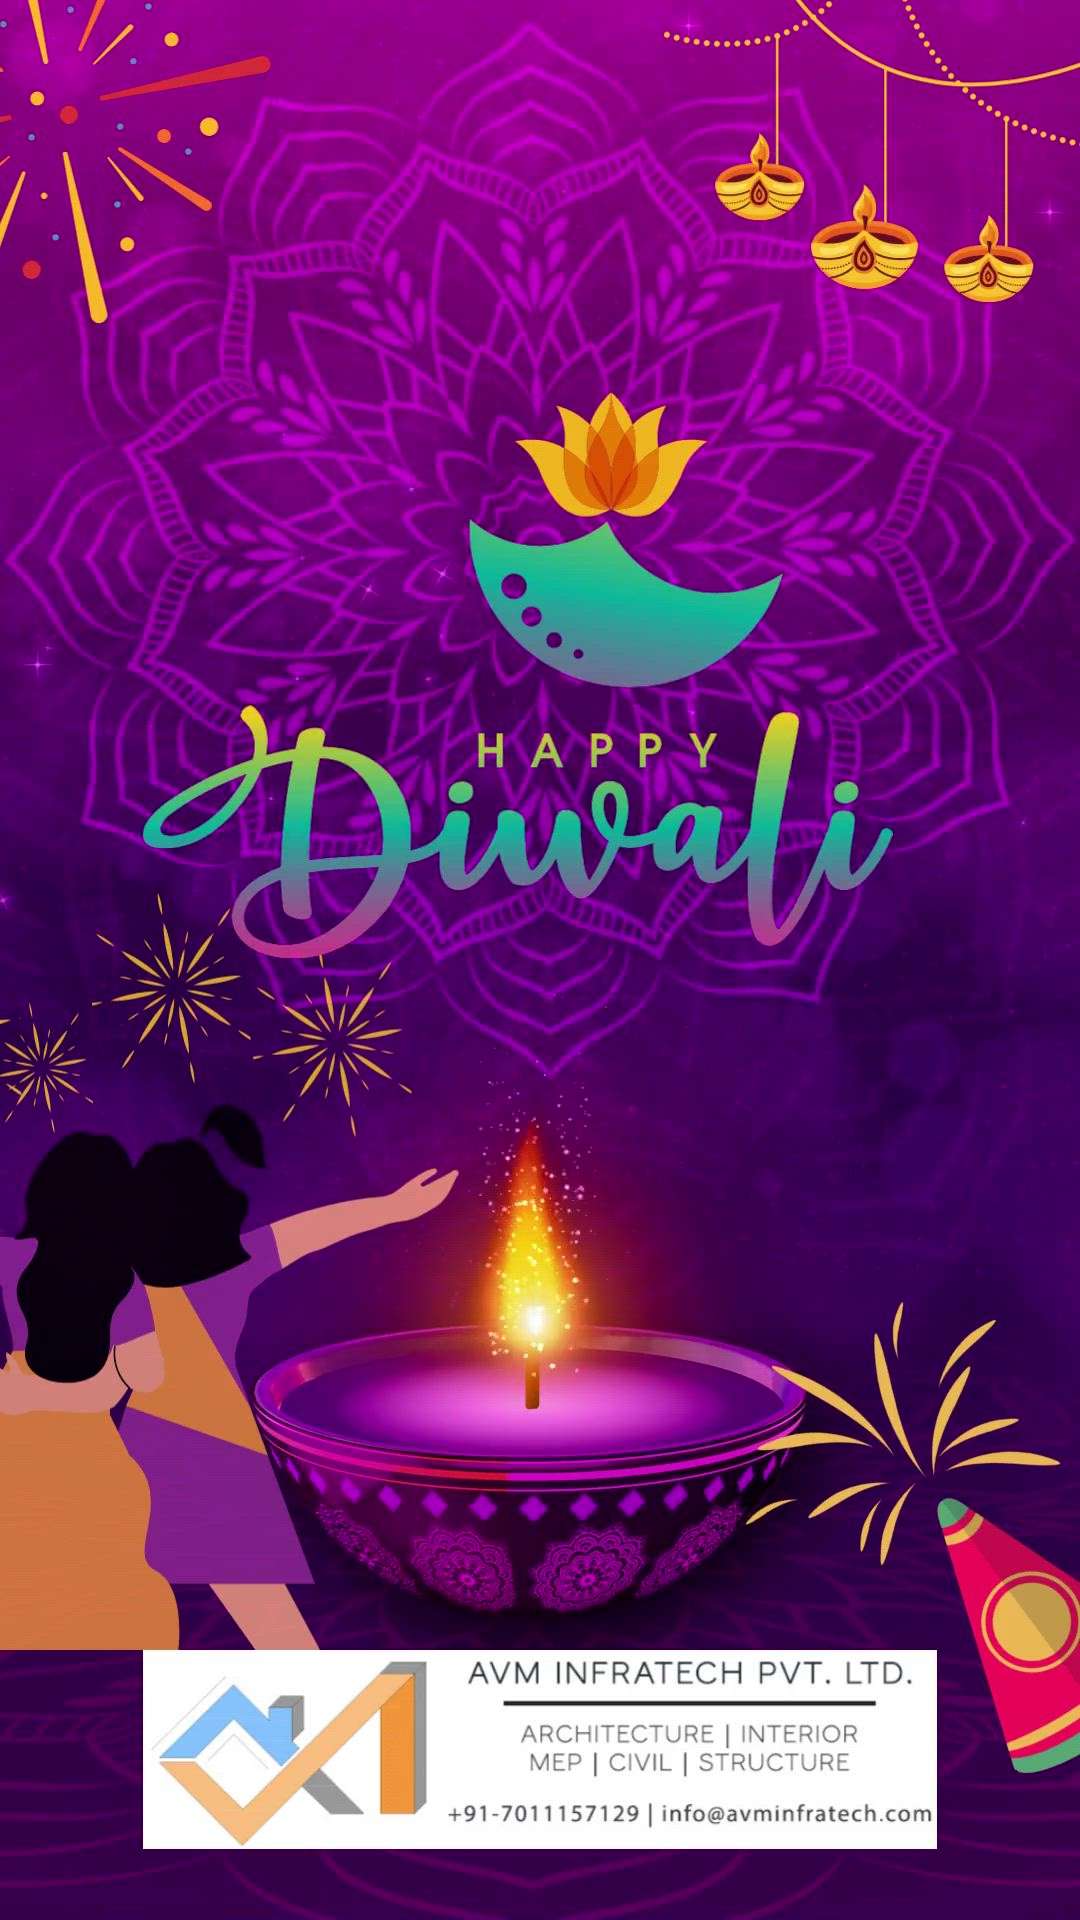 Wishing you and your family a very Happy Diwali 😄😄 


Follow us for more such amazing updates. 
.
.
#diwali #happy #happydiwali #deepawali #deepavali #india #indian #indianfestival #indianfestivals #festivities #architect #architecture #interior #interiordesign #commercial #residential #celebrate #celebration #2022 #avminfratech #diwalihampers #diwalidecorations #diwalioutfit #diwalidecor #diwaligifts #diwaliparty